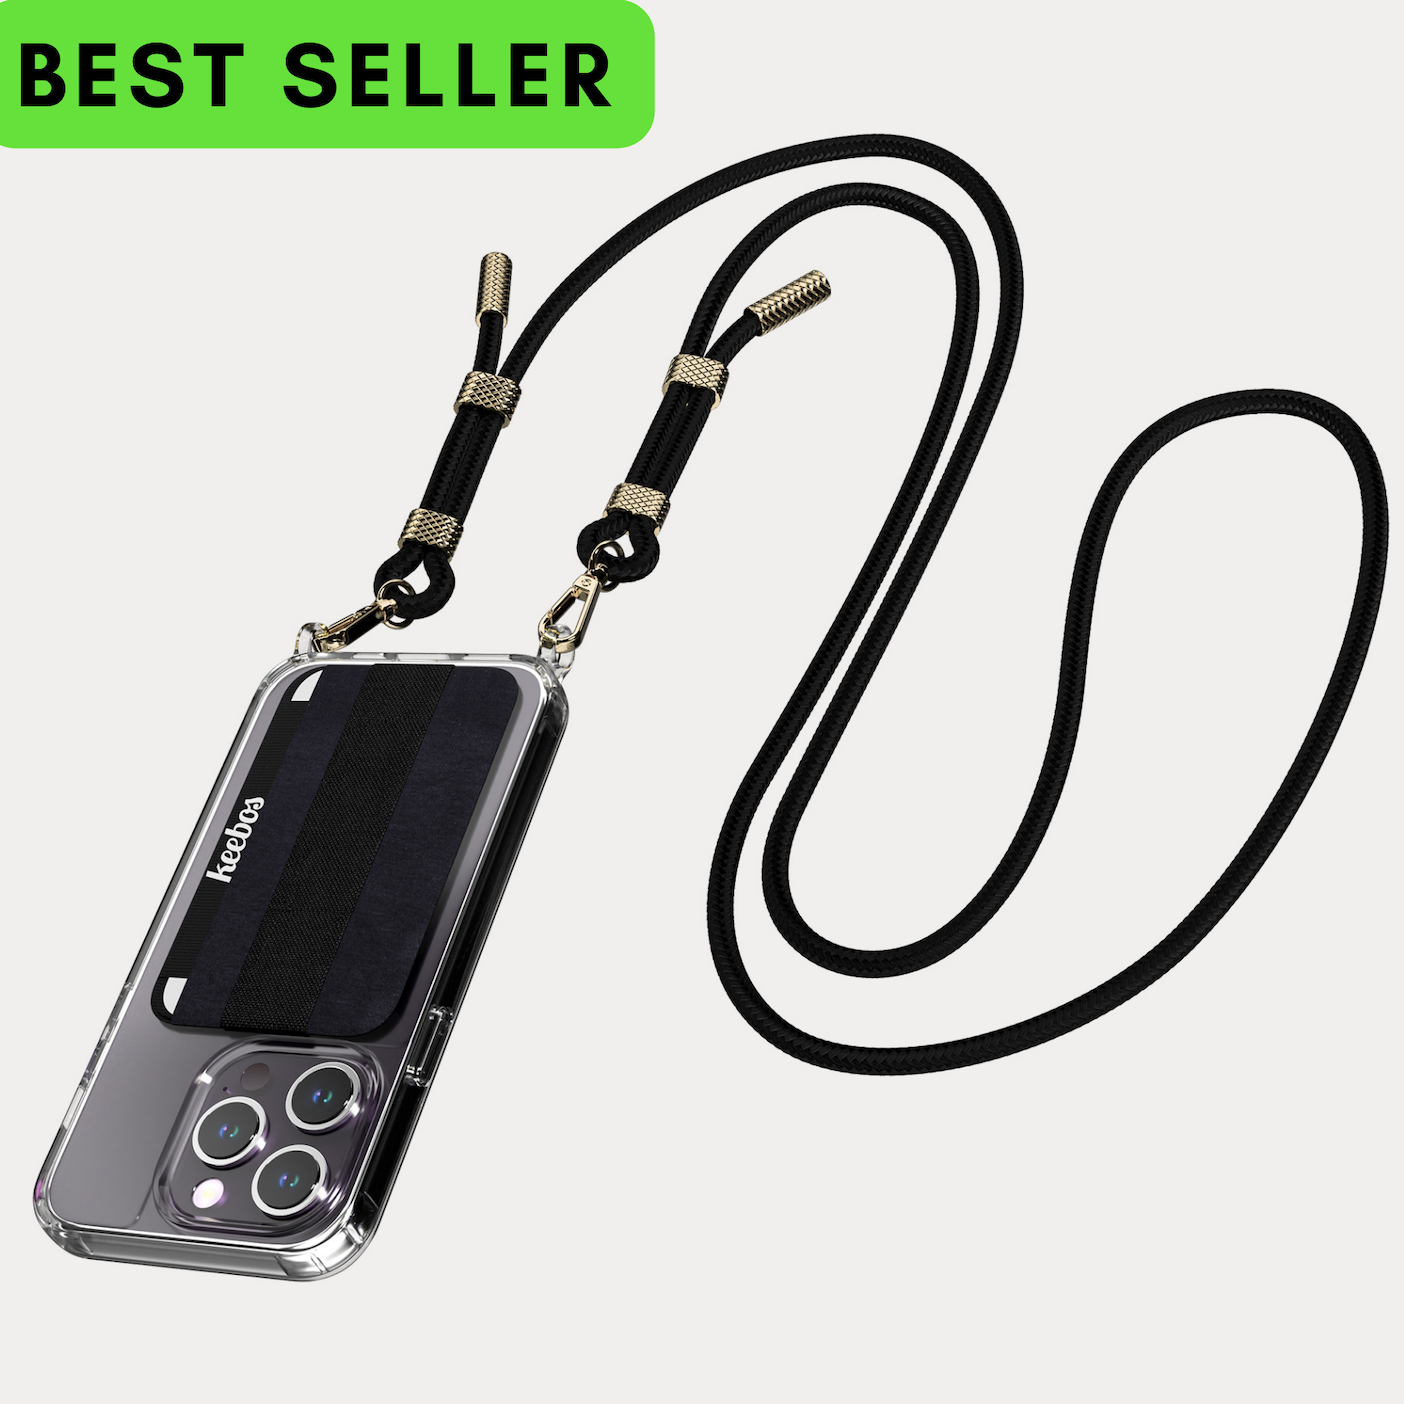 Cell Phone Case for iPhone with Neck Strap/Code/Chain Cell Phone